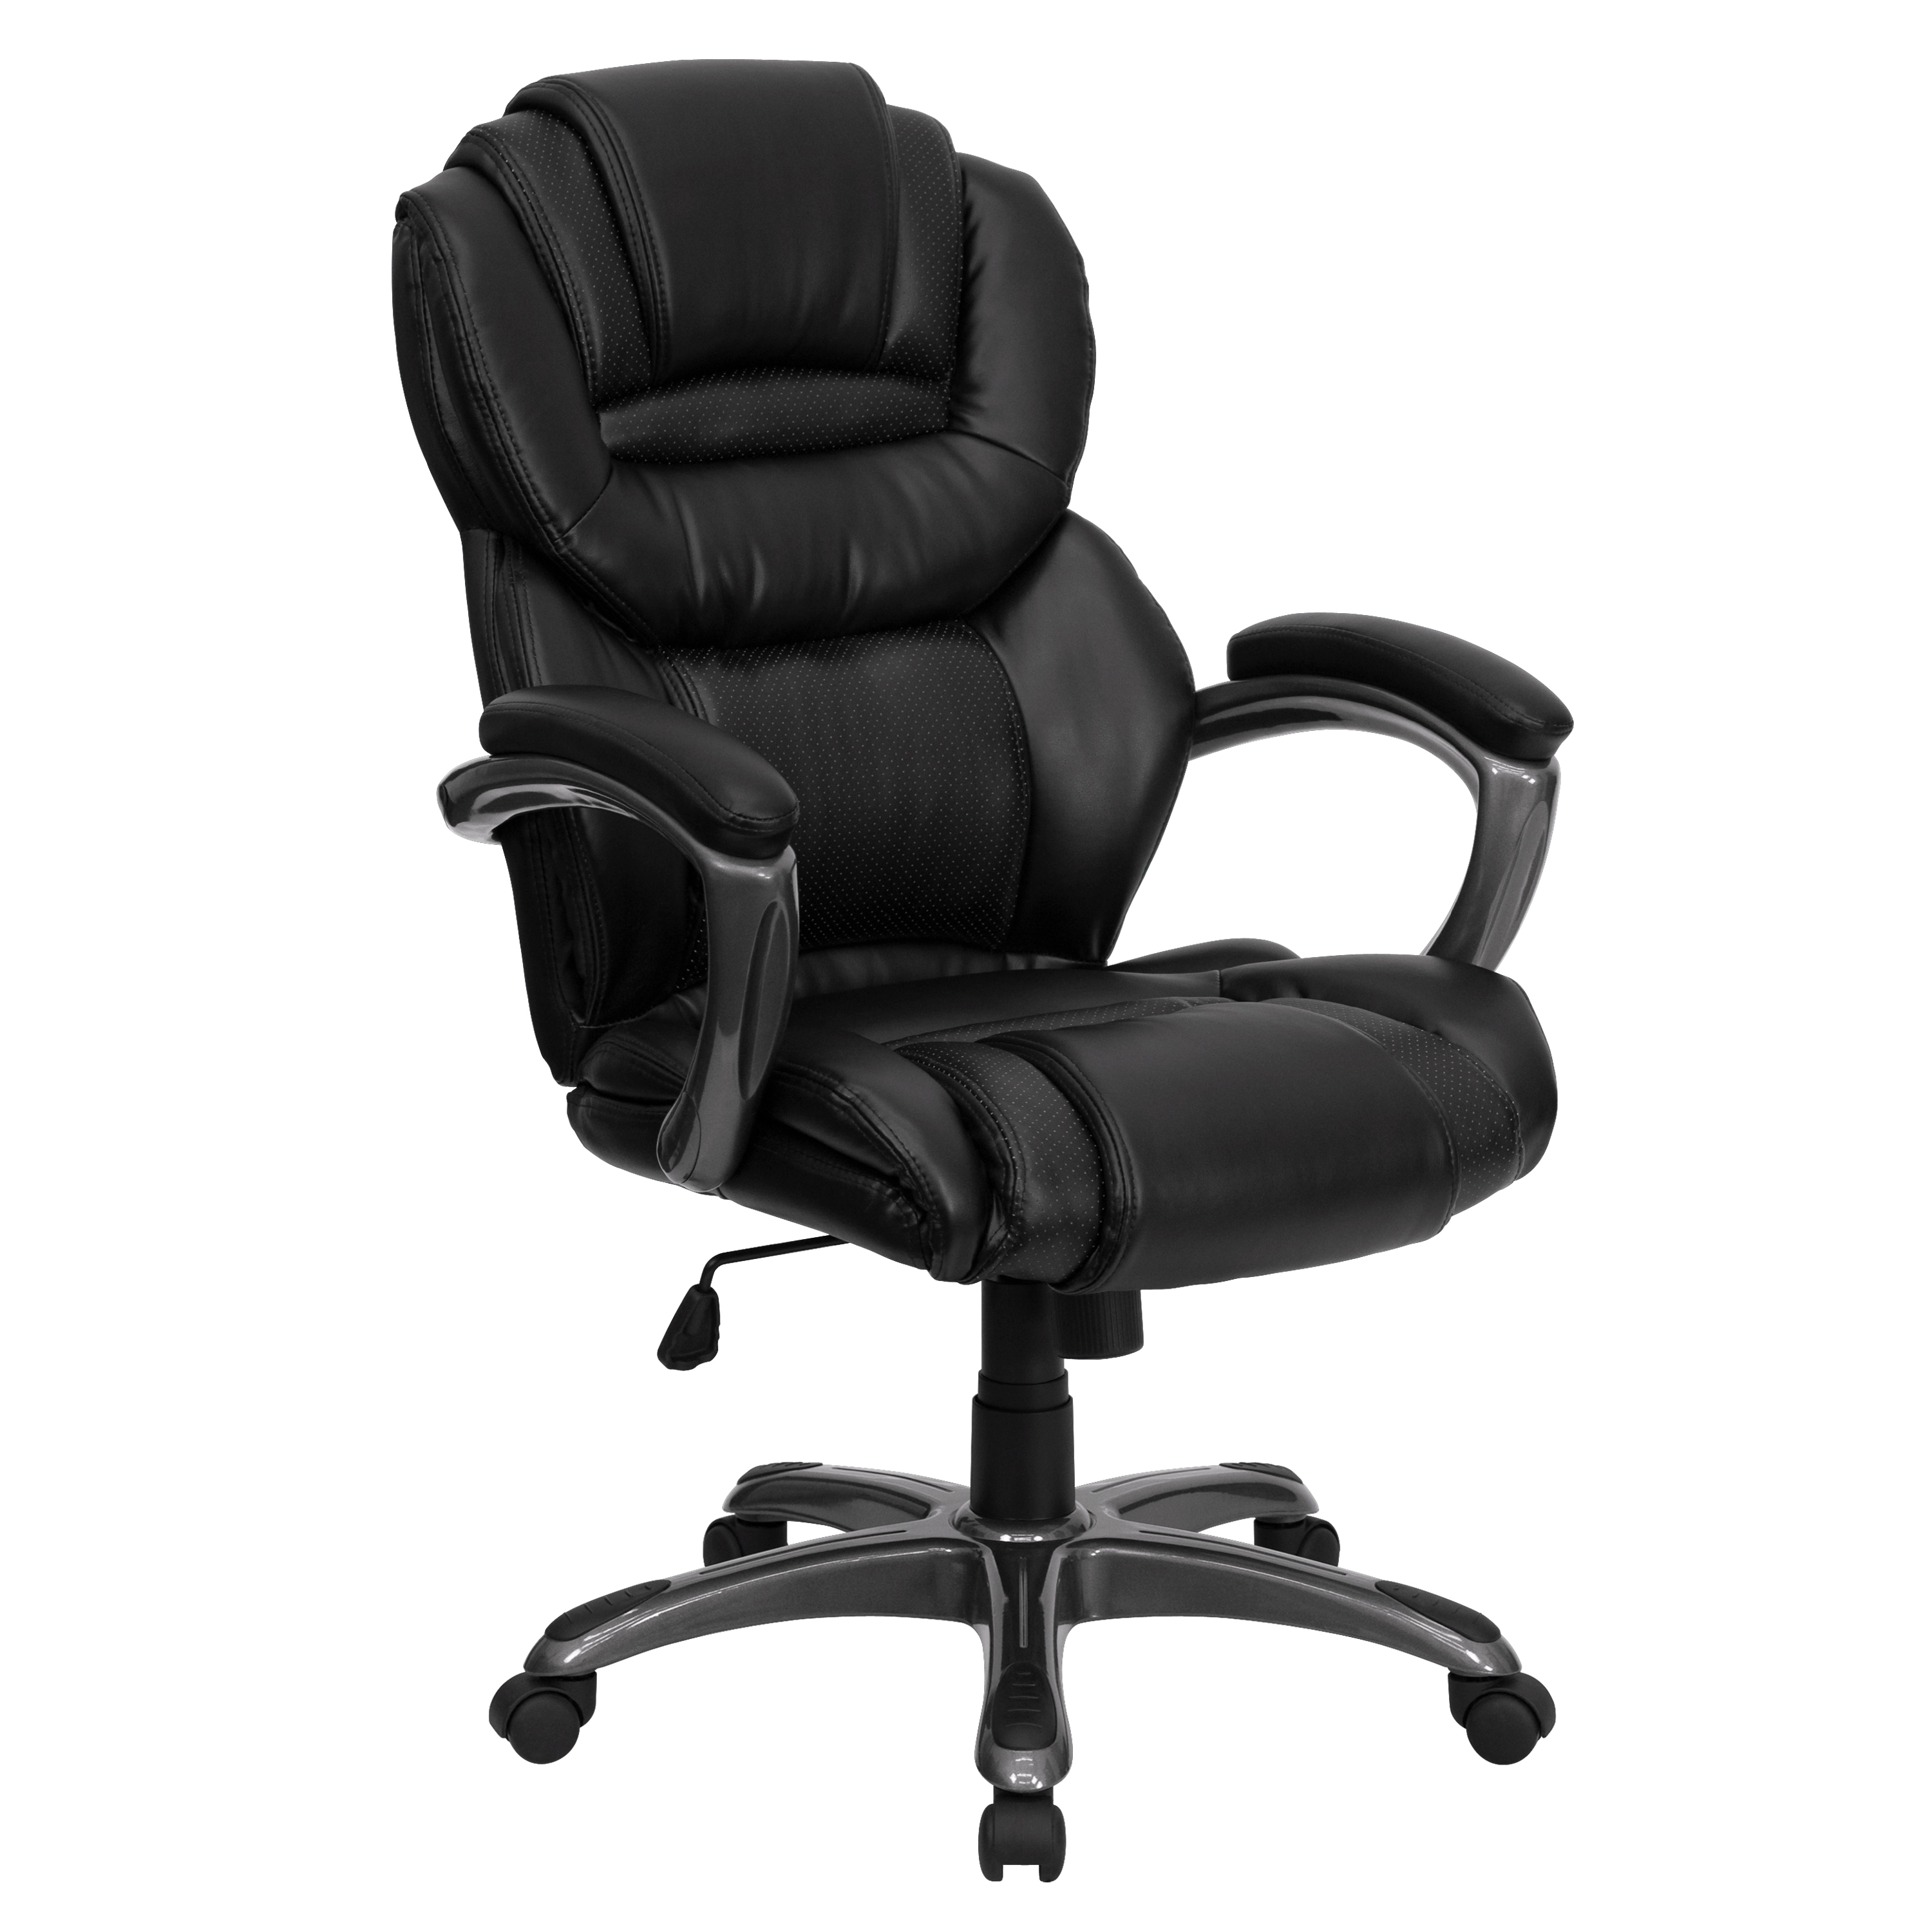 Flash Furniture High Back Black LeatherSoft Executive Swivel Ergonomic Office Chair with Arms - image 1 of 12